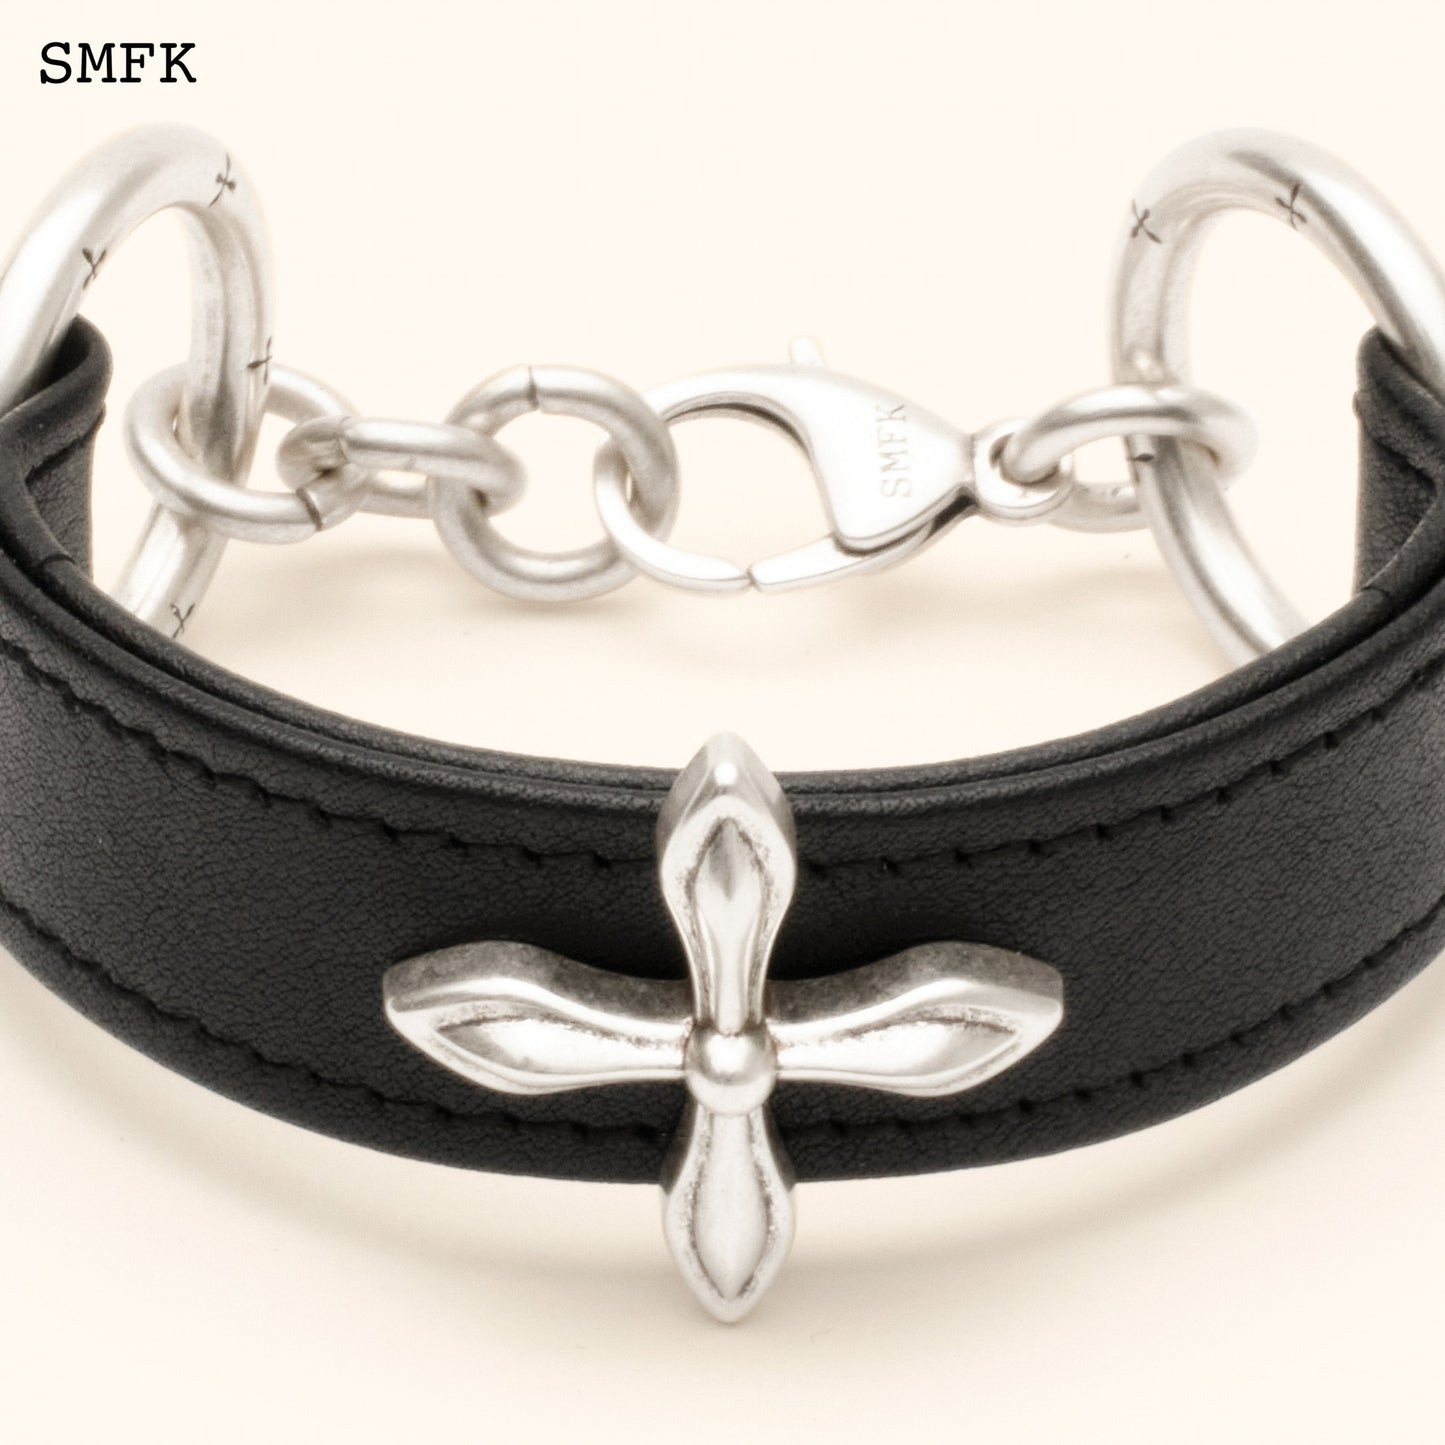 SMFK Compass Black Thick Leather Wristband